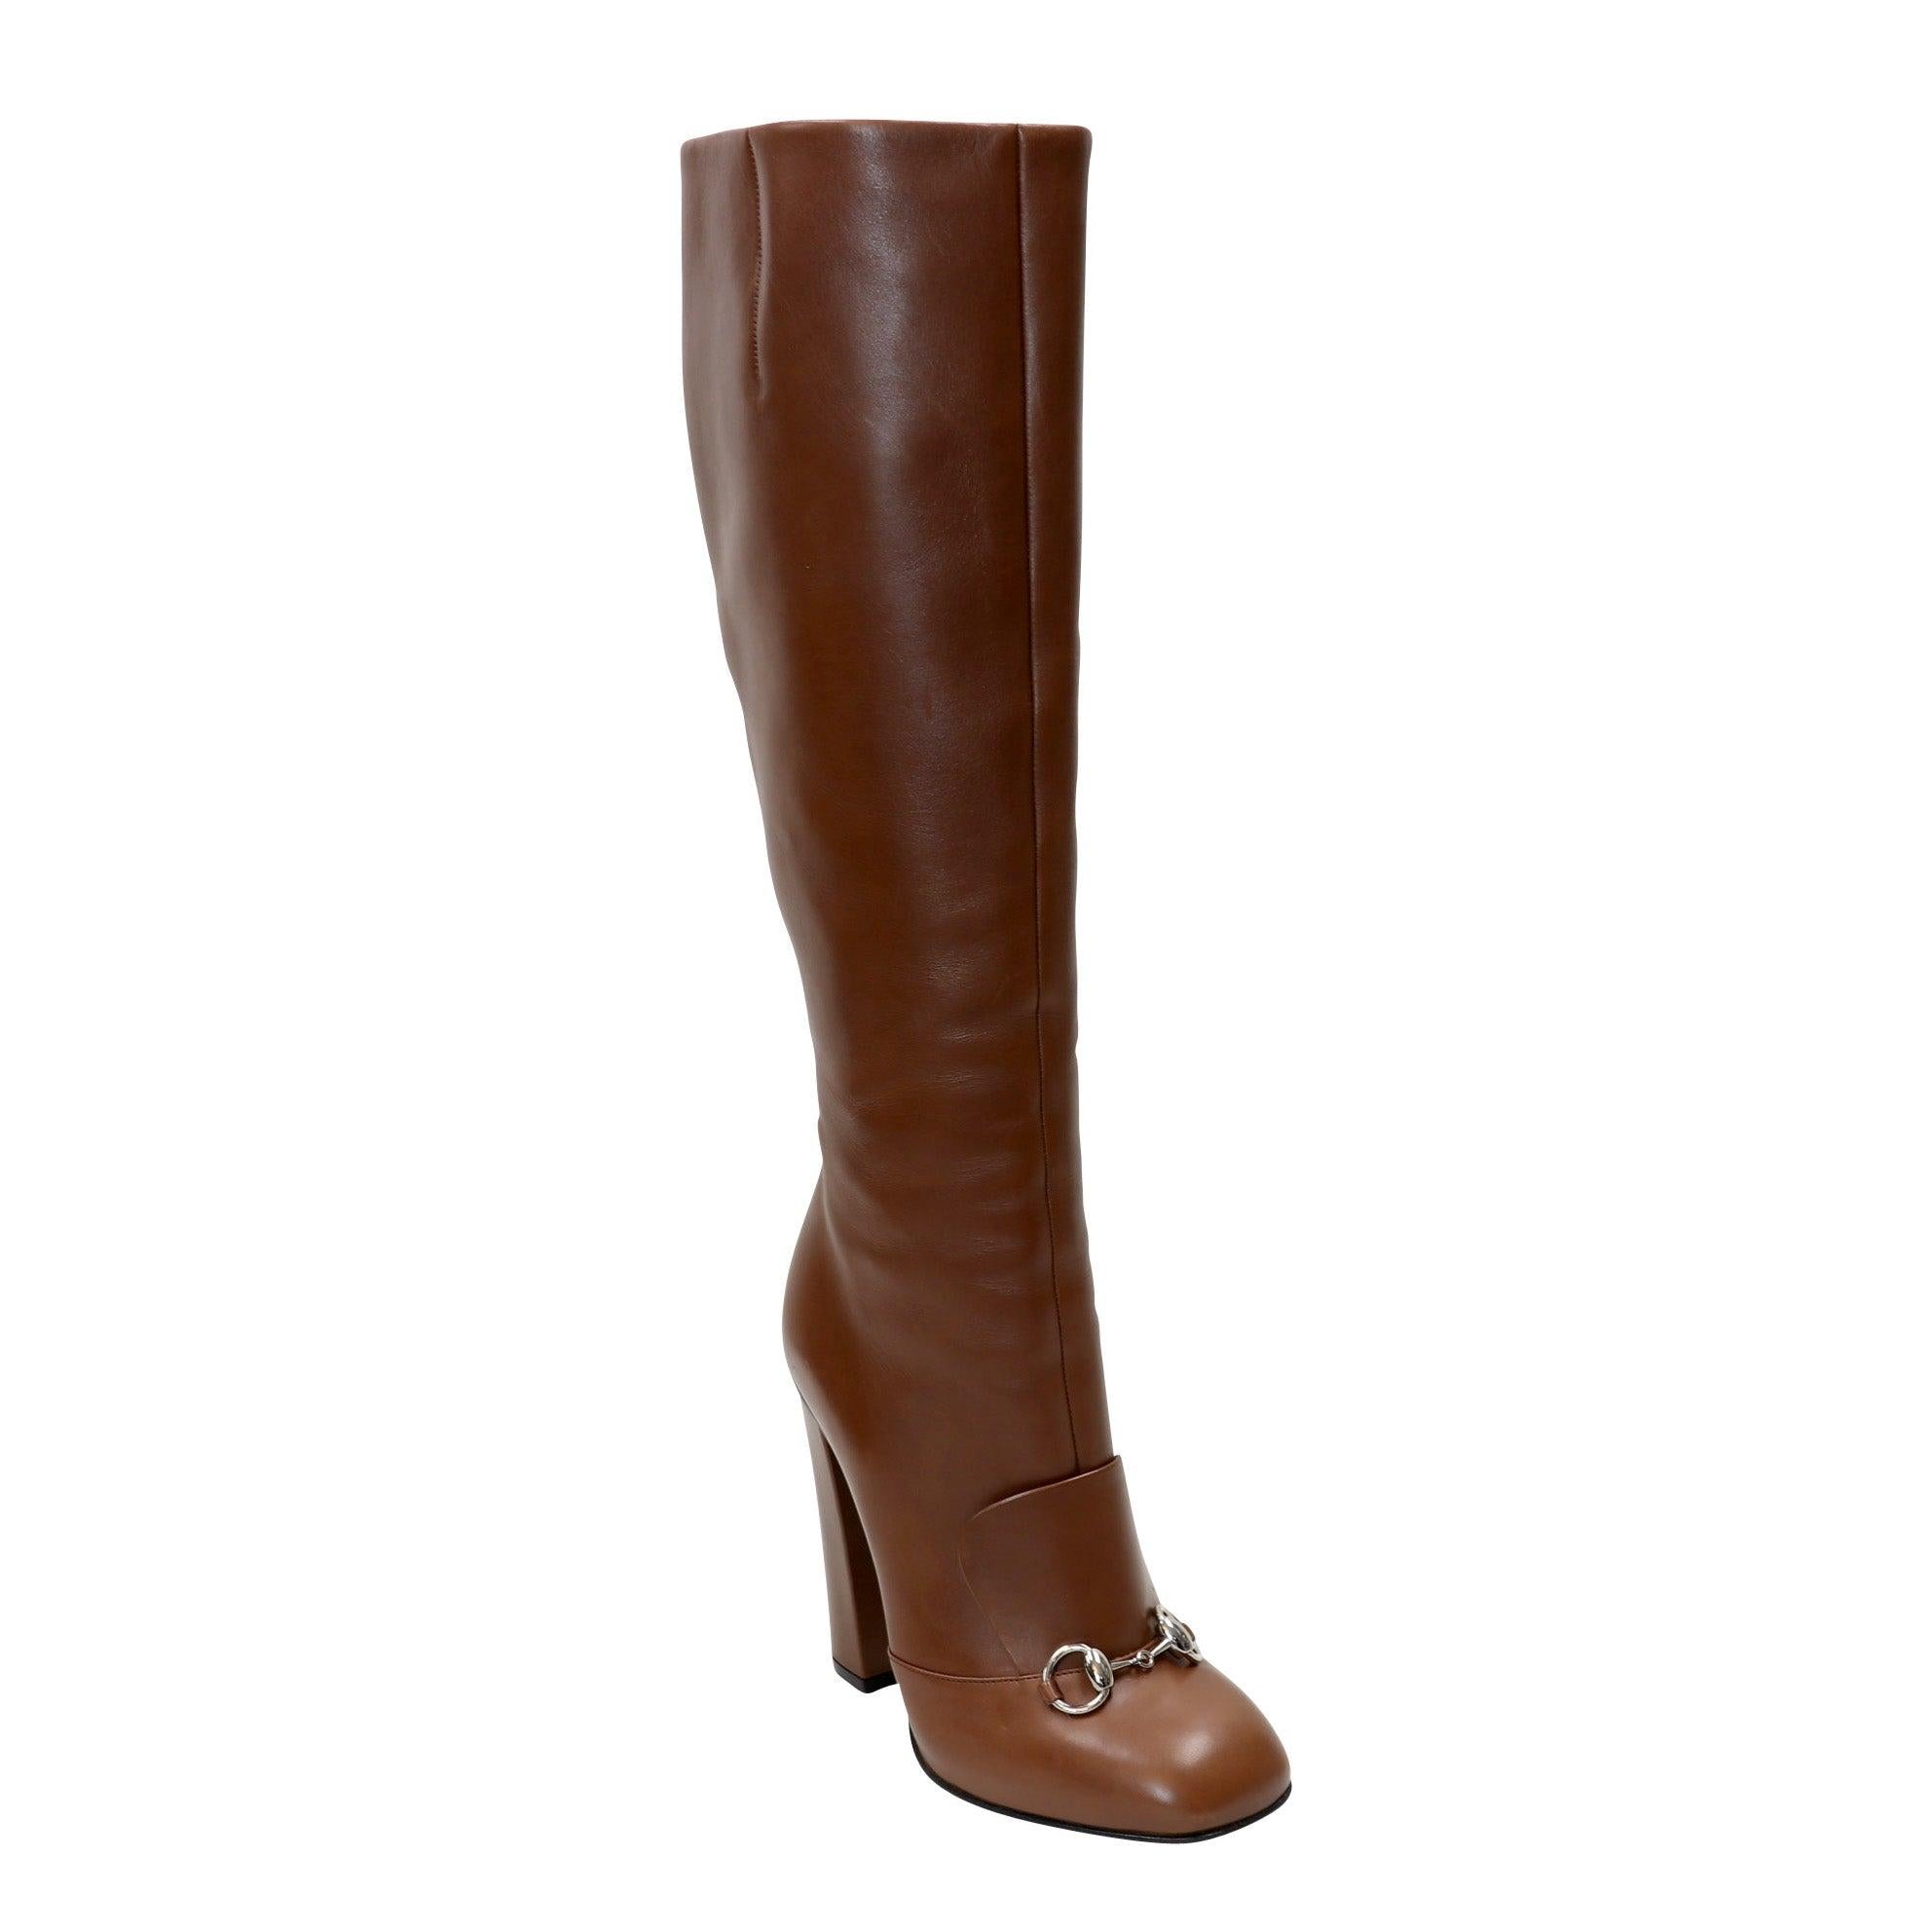 Gucci Brown Leather Horsebit Knee High Riding Boots 39.5 GG-S1111P-0001 For Sale 2